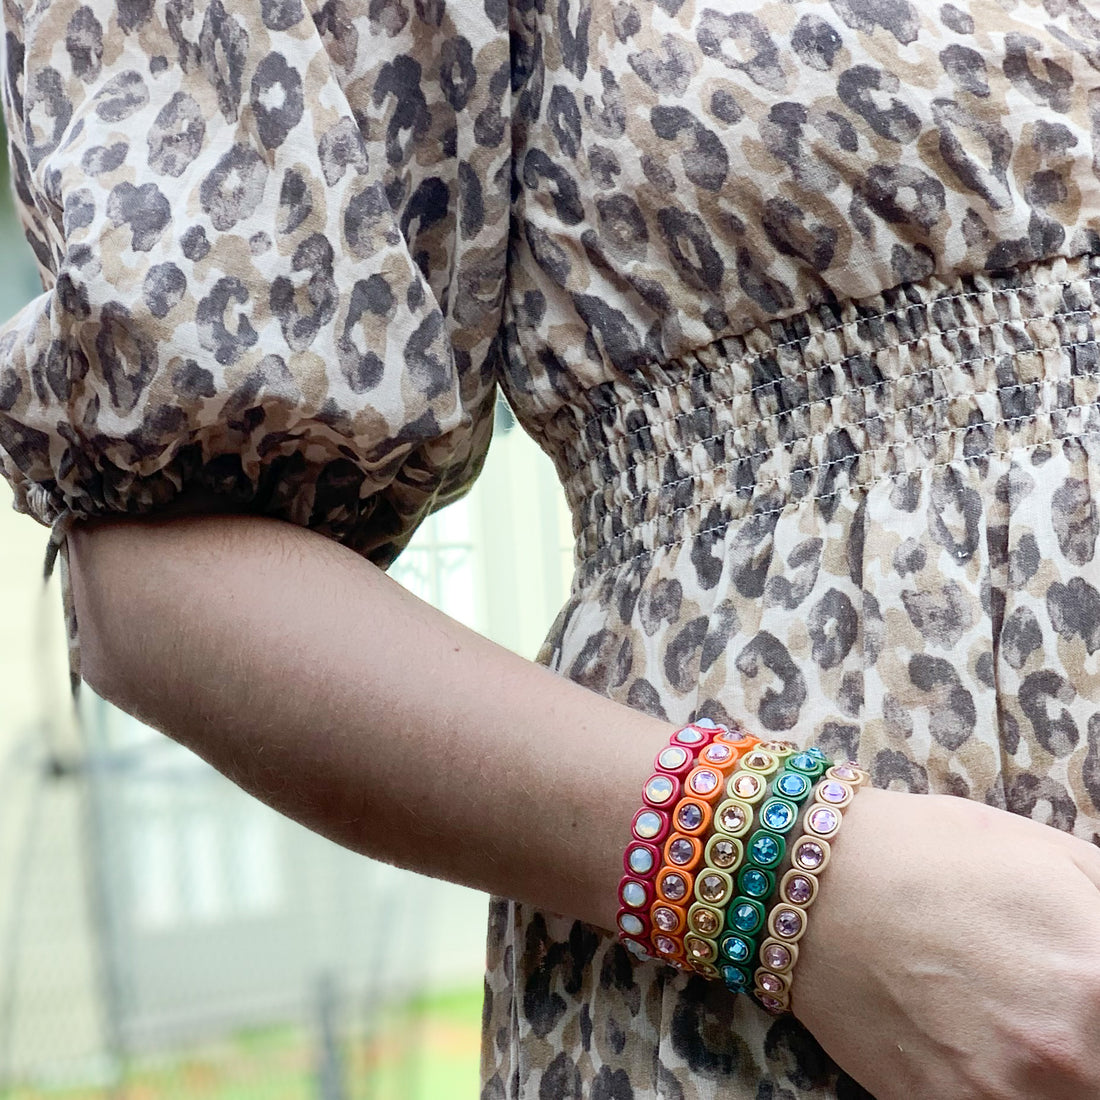 How to Wear It: Gemstone Stackers